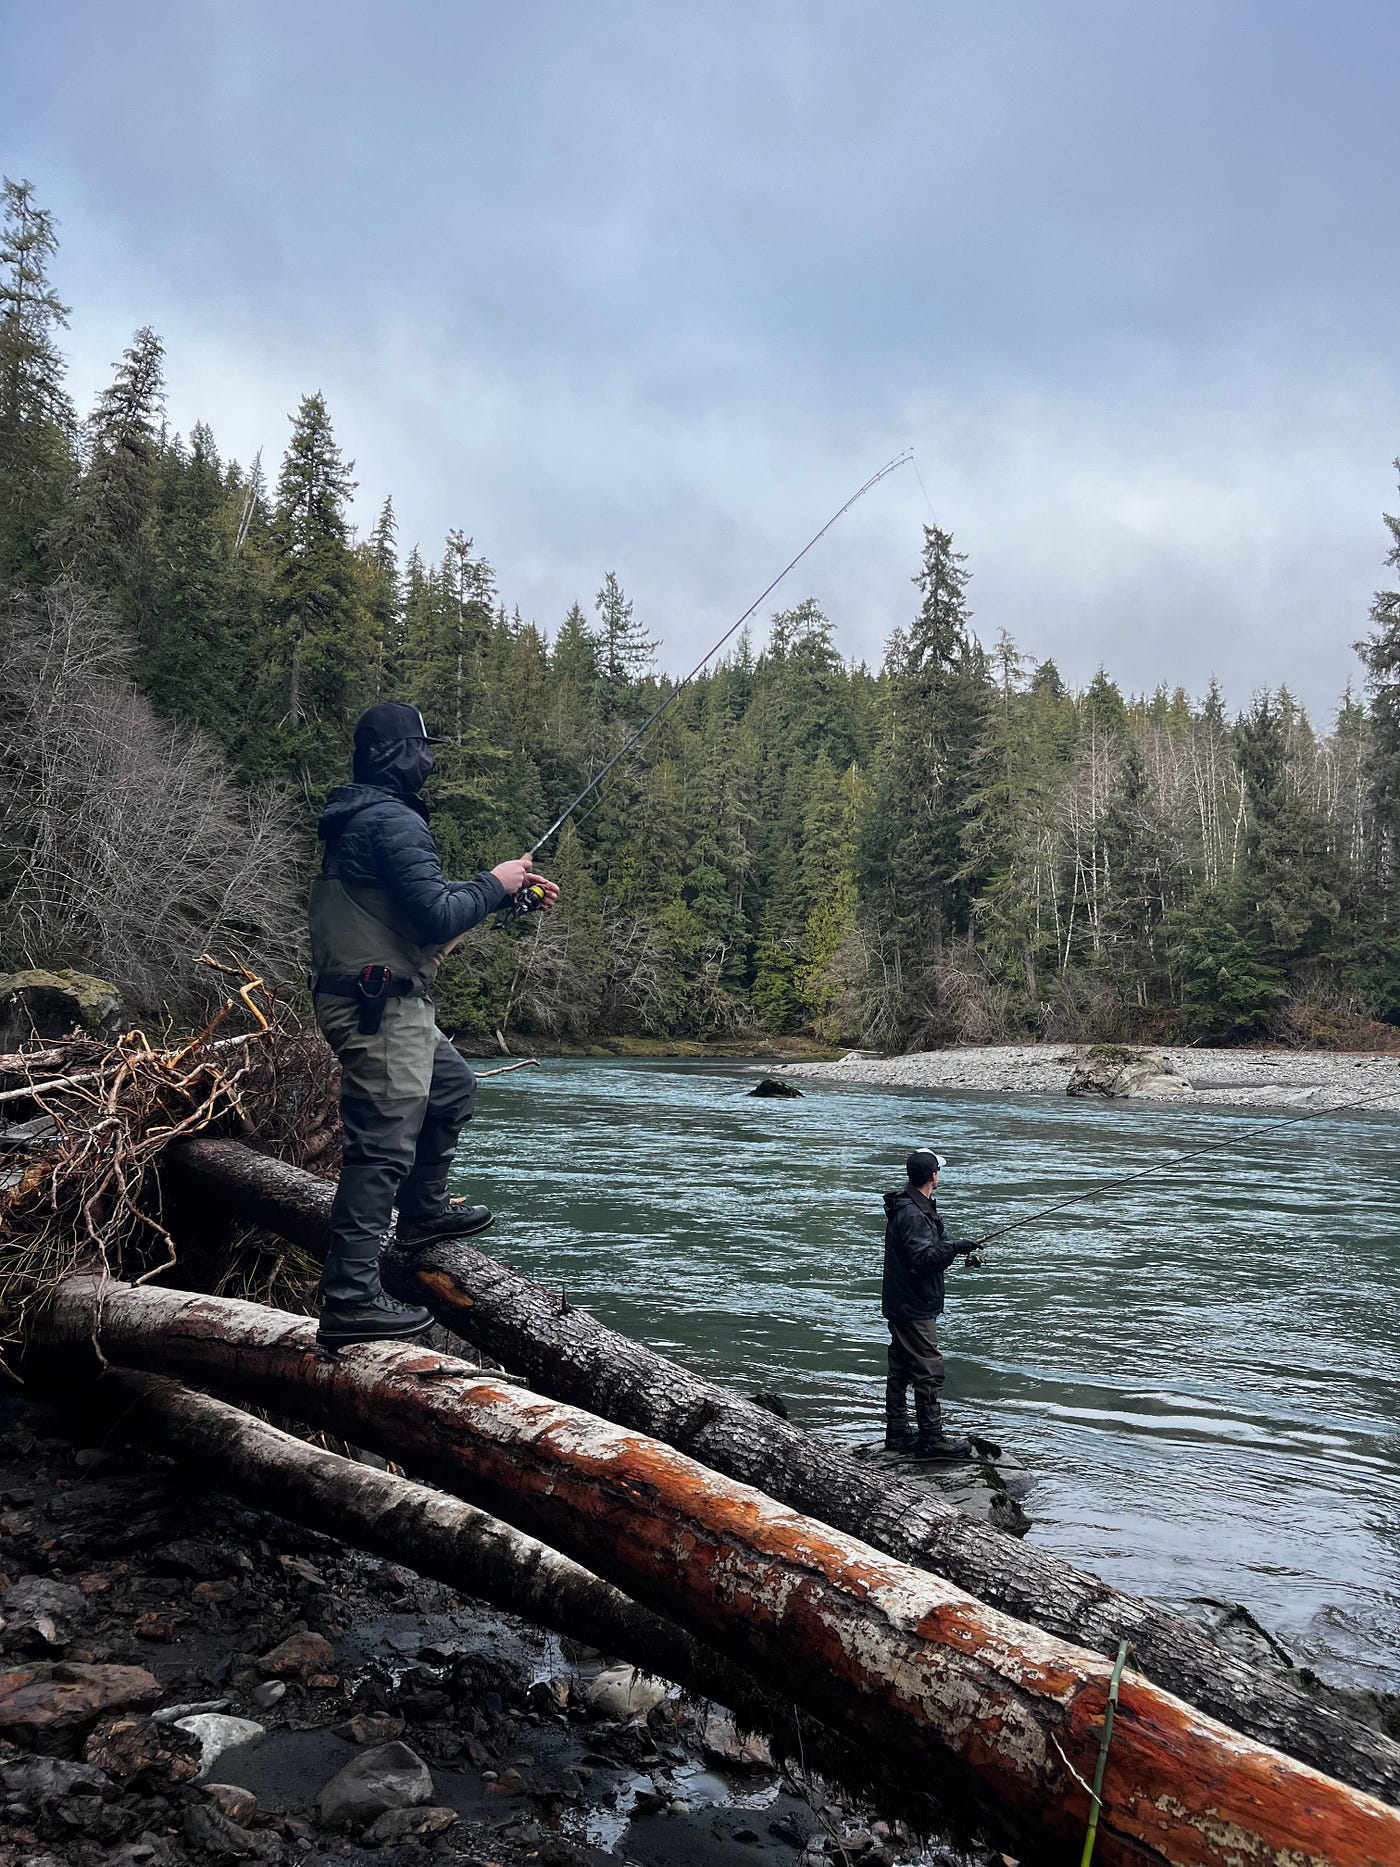 Hoh River study: Does fishing from a boat affect wild steelhead